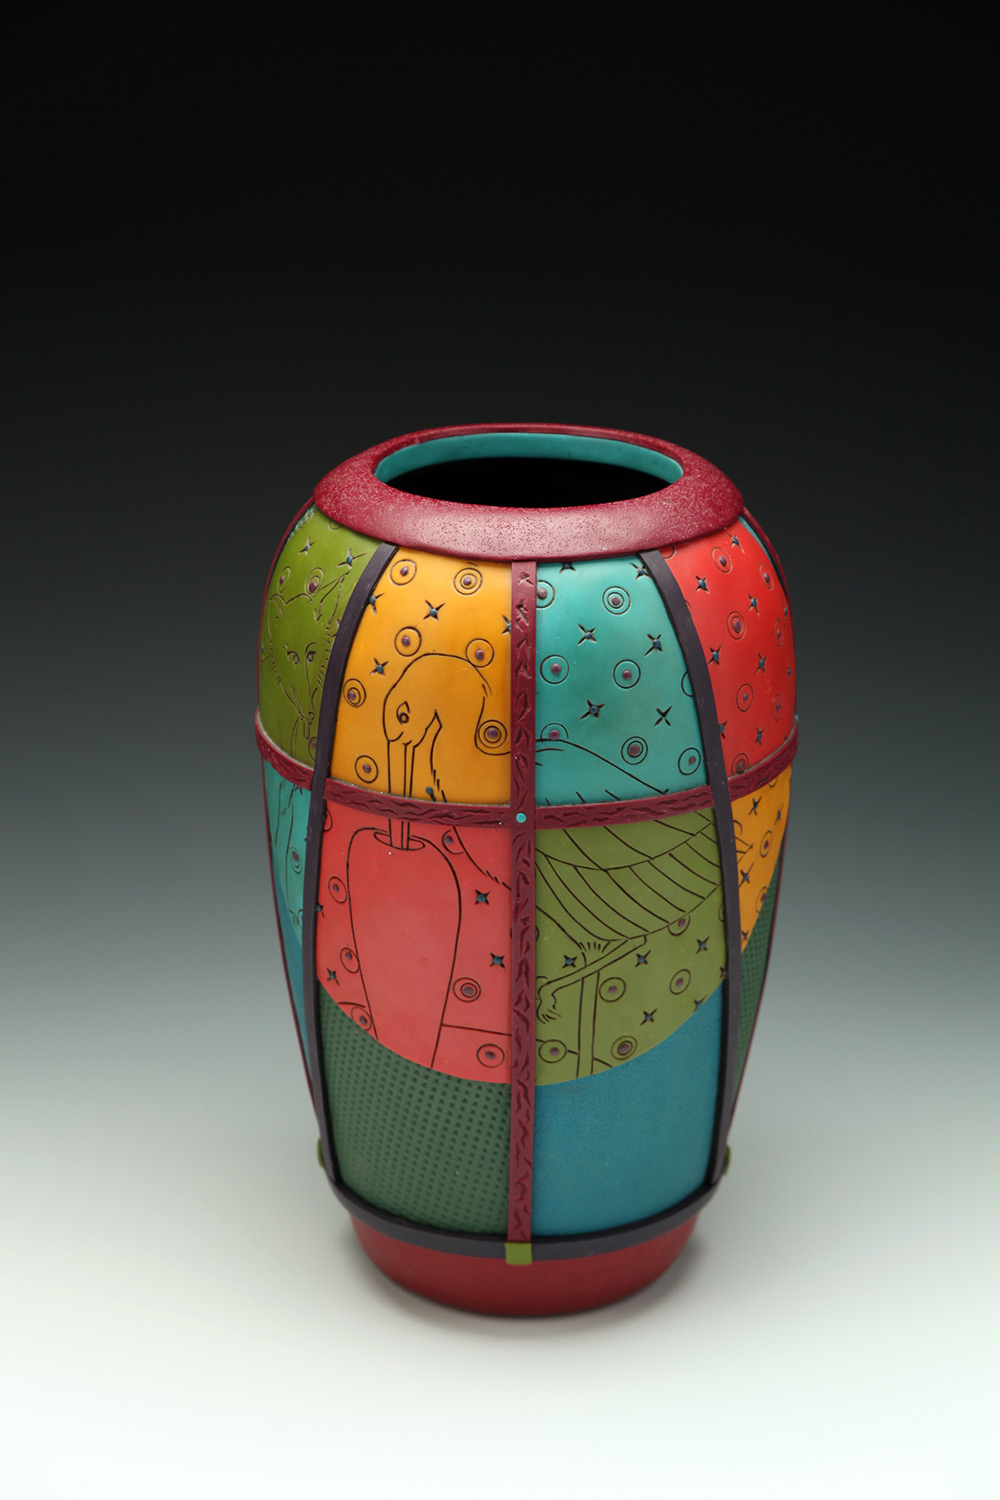 Colorful polymer vessel with an image of a stork on one side